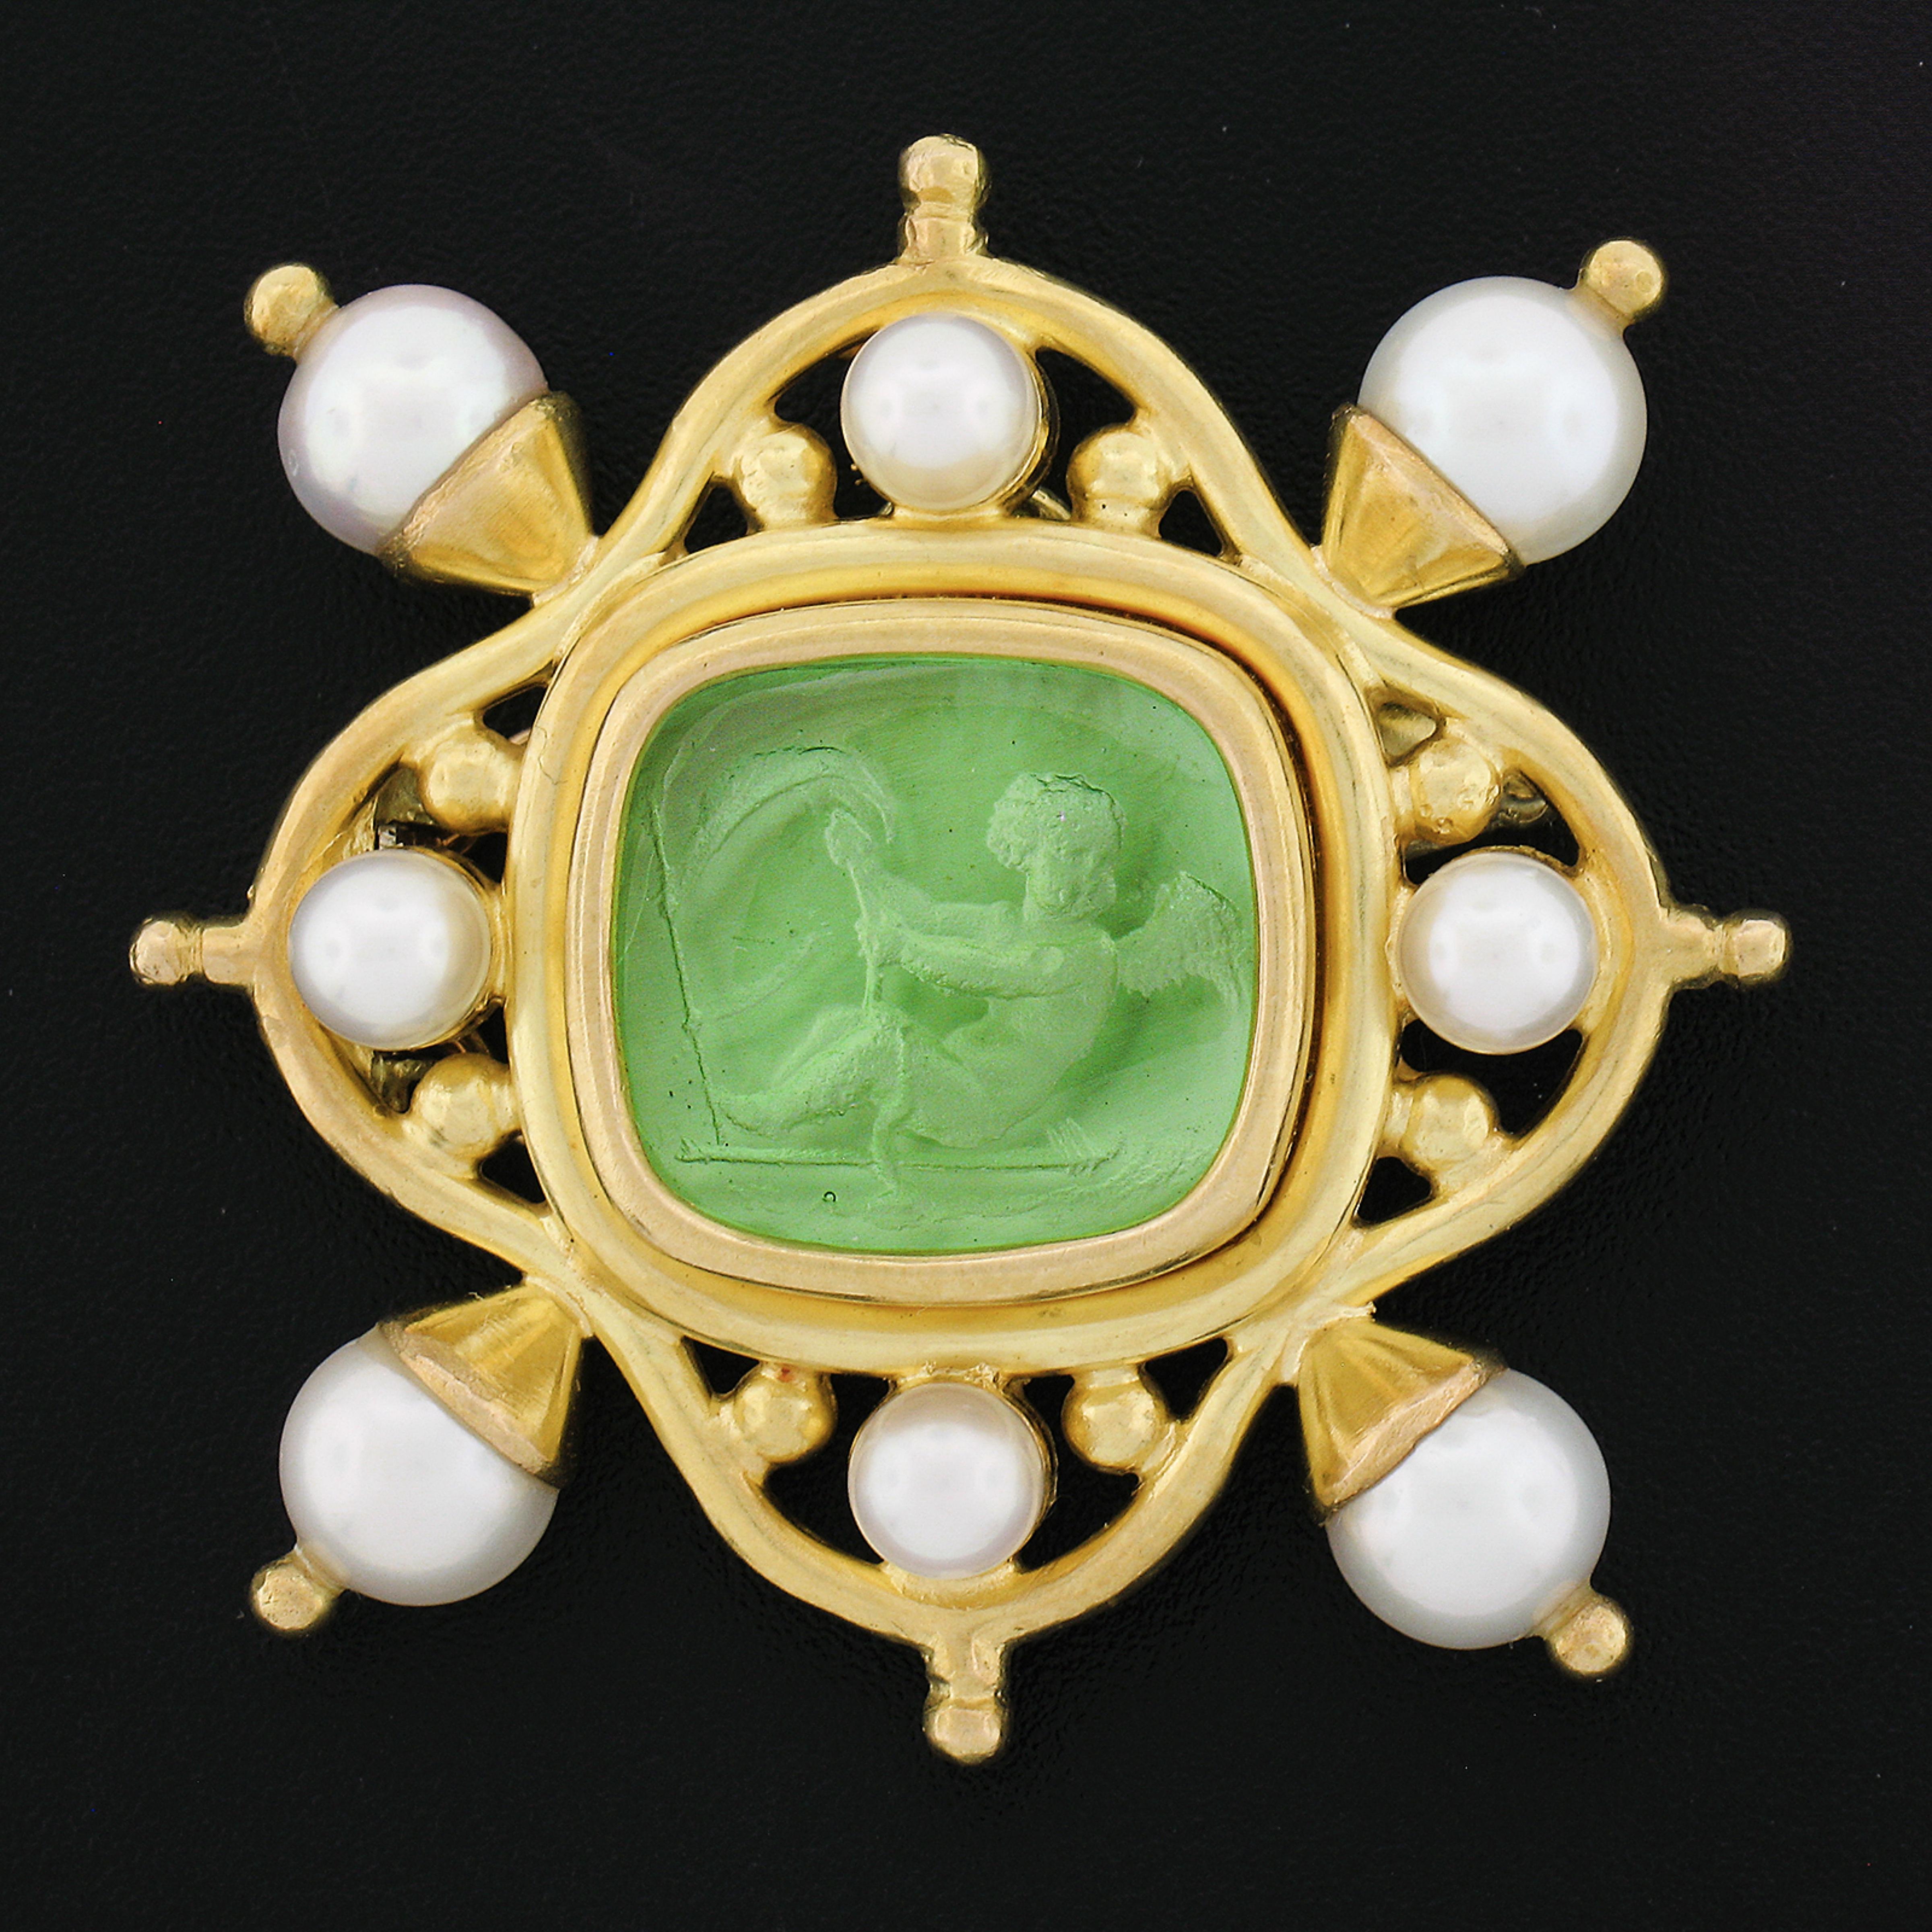 This unique and very well made brooch/pendant is designed by Elizabeth Locke and crafted in solid 18k yellow gold. It features intaglio carved green glass neatly bezel set at its center surrounded by an elegant, polished finish, open work frame